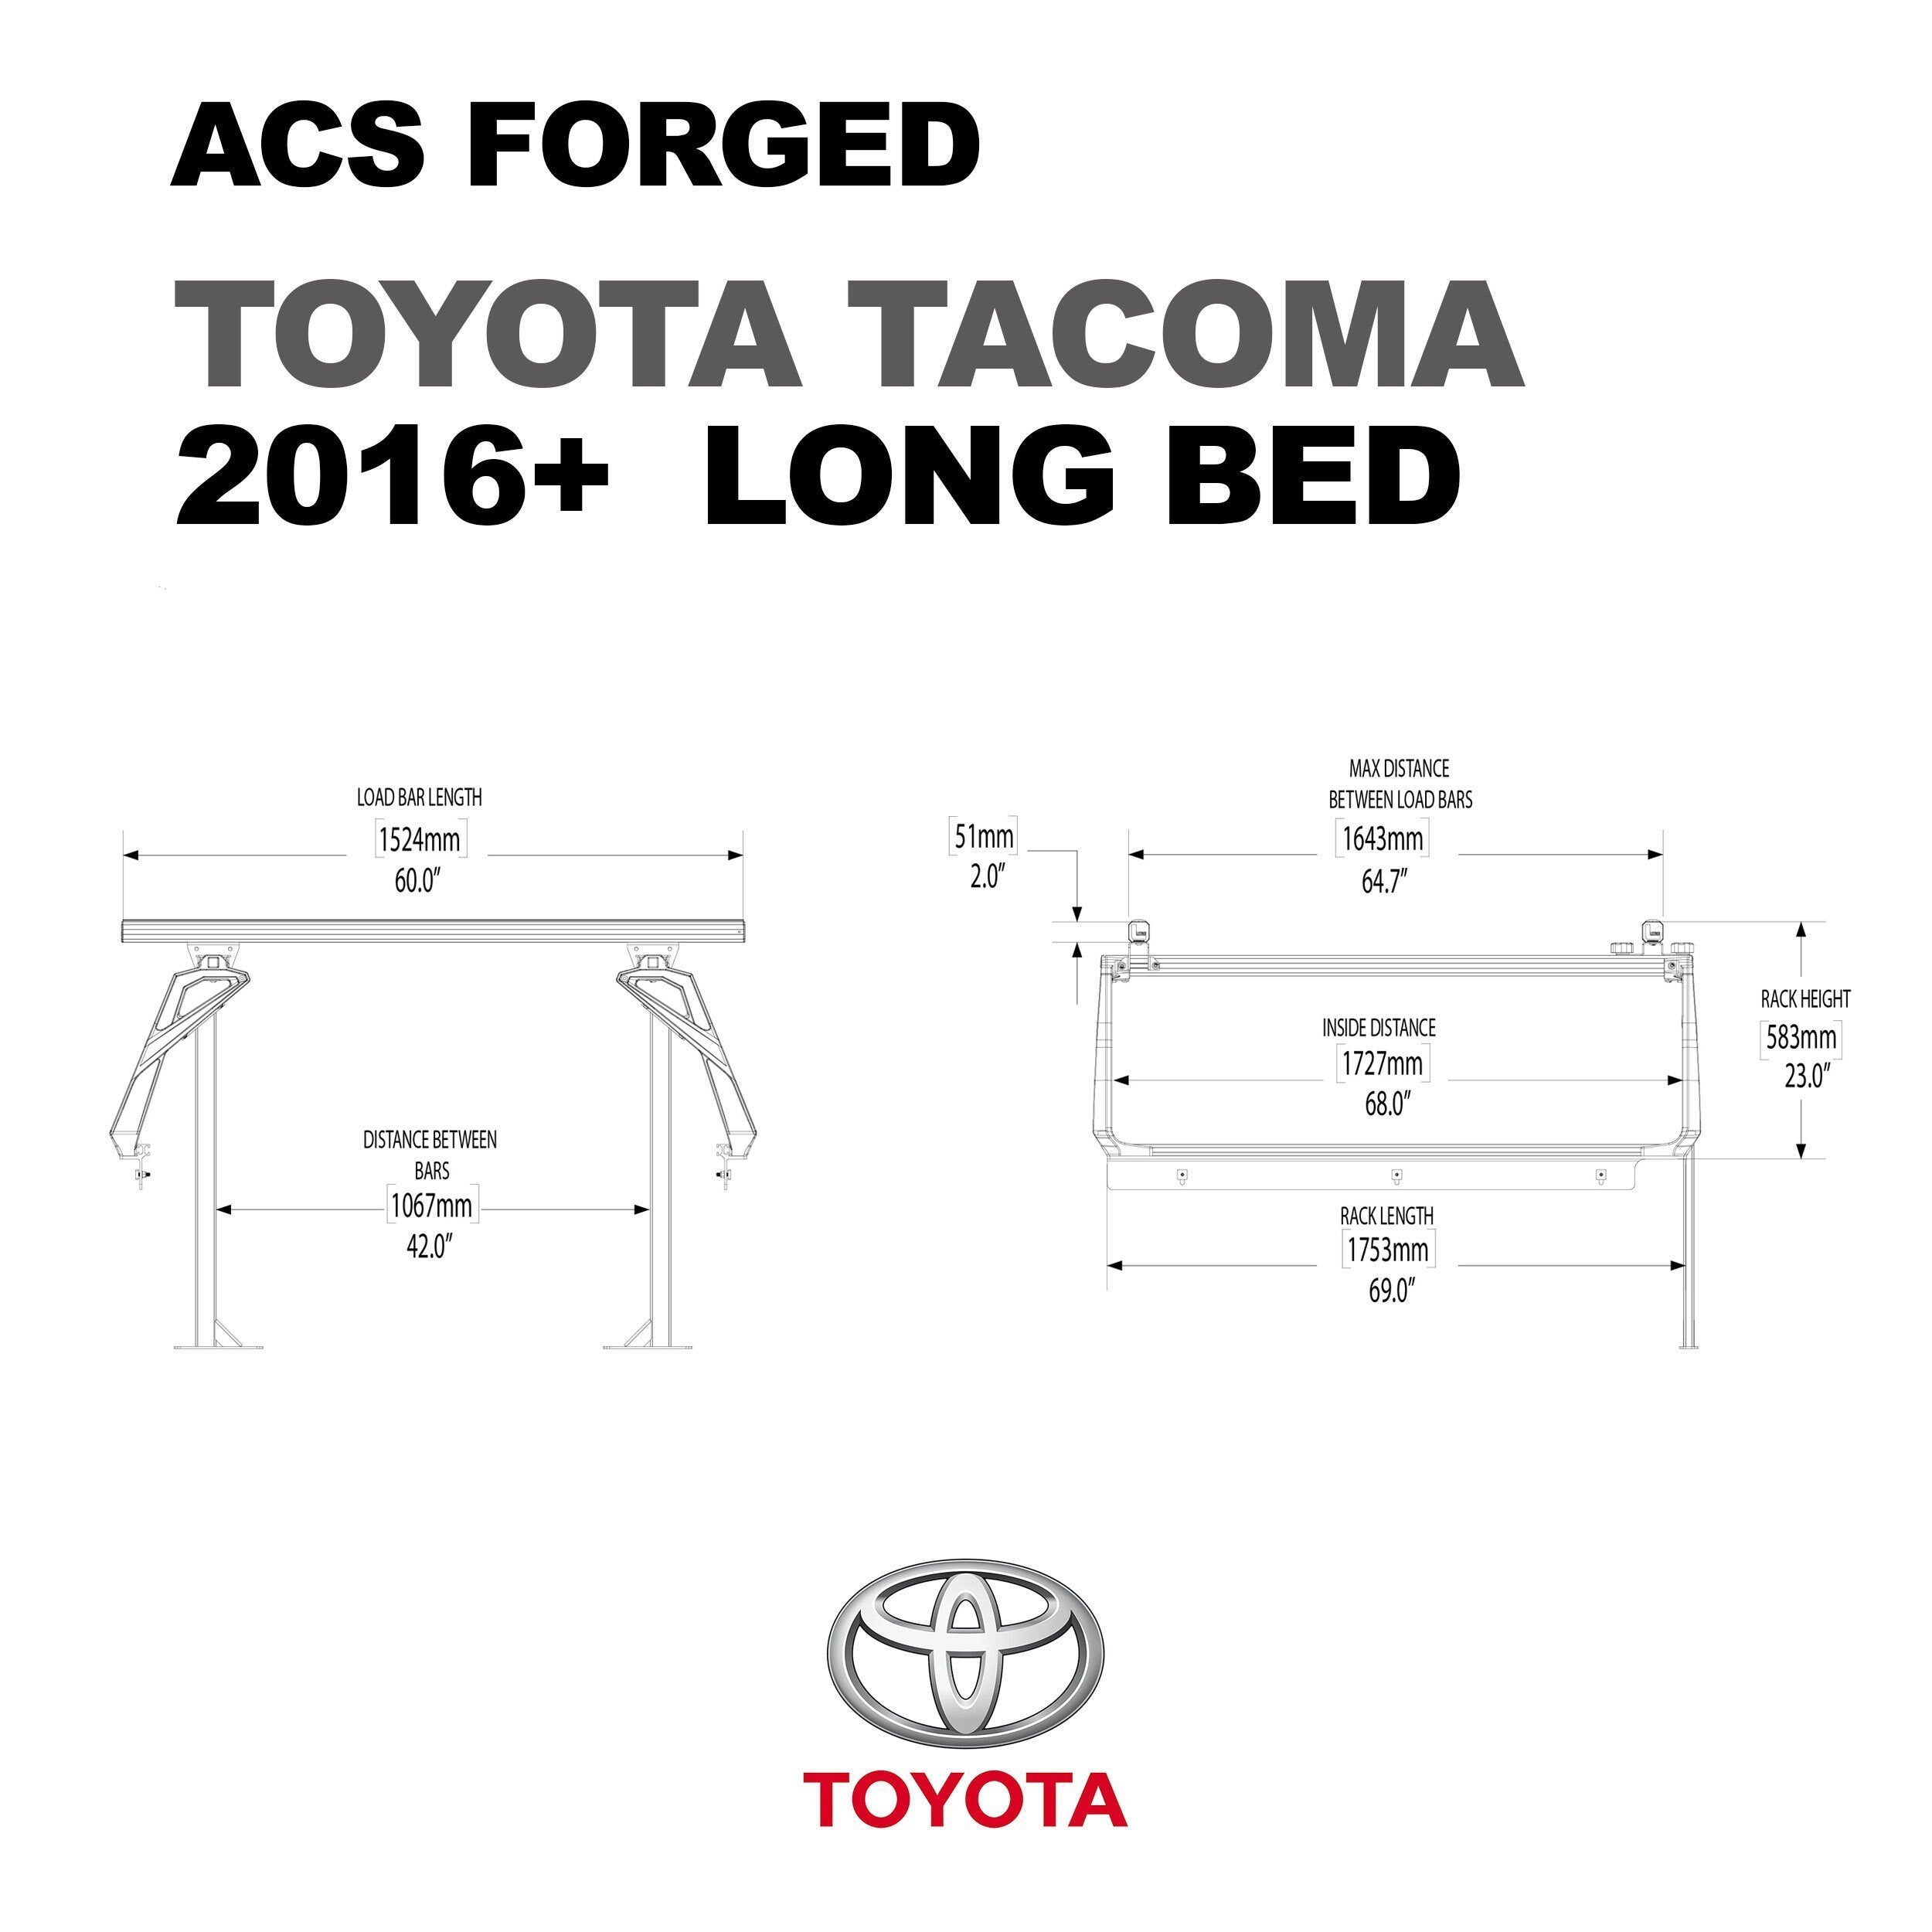 '16-20 Toyota Tacoma-ACS Forged Bed Accessories Leitner Designs design